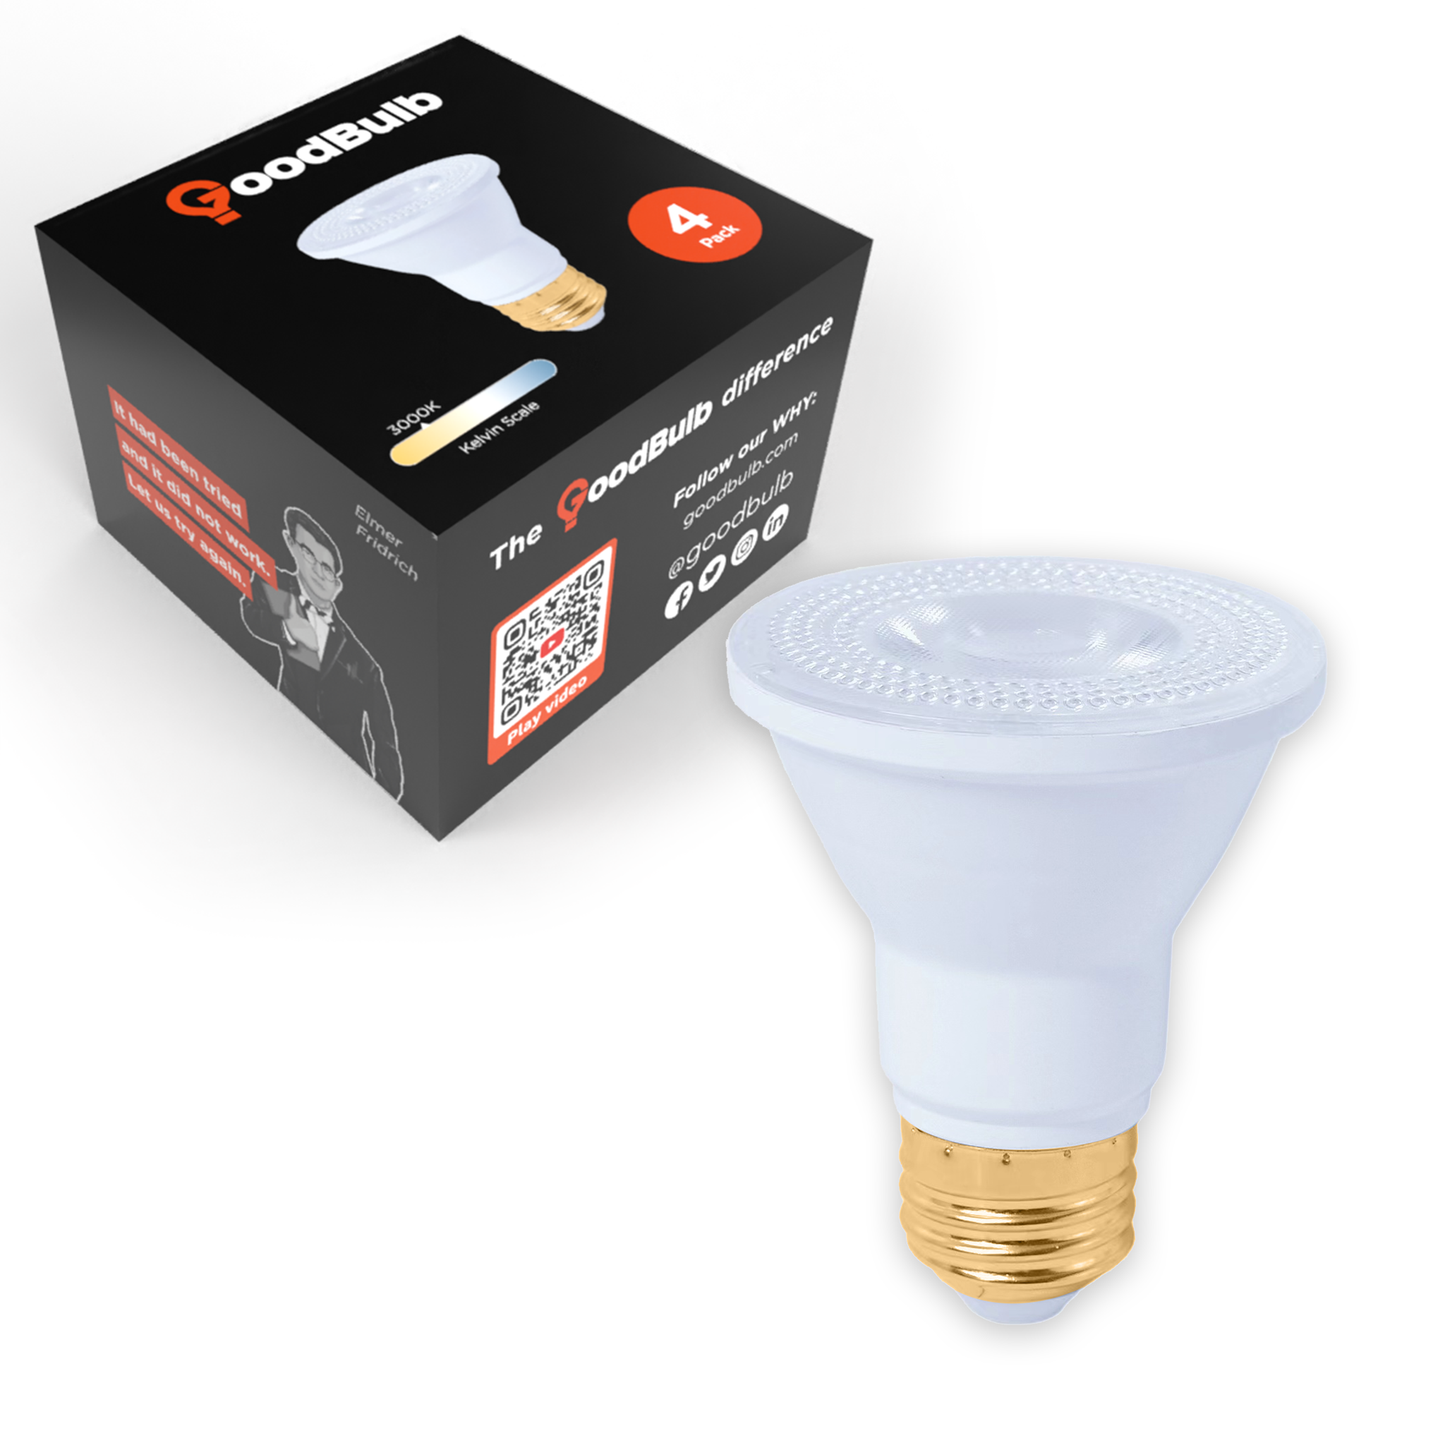 PAR20 LED light bulb with box. Emits a warm, comfortable spectrum of light. Can last 25,000 Hours and is dimmable.